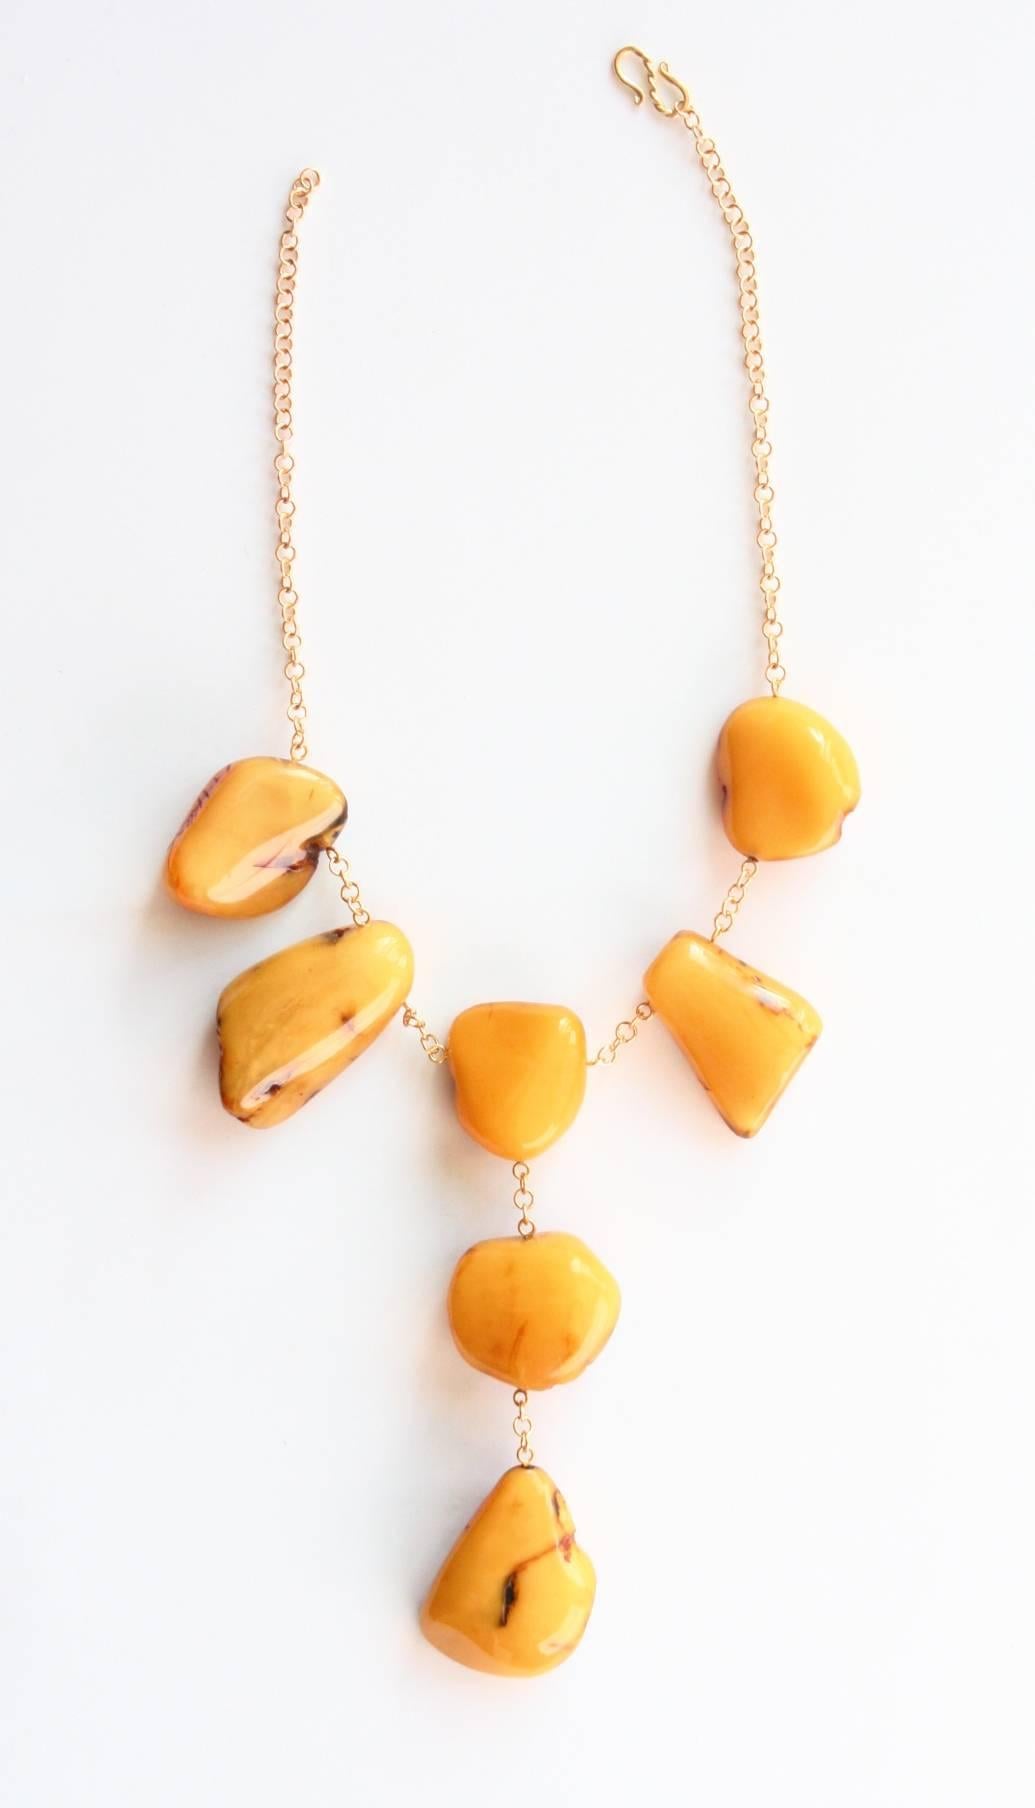 Very precious baltic amber stone necklace adjustable.
18kt Gold gr. 13,50.
All Giulia Colussi jewelry is new and has never been previously owned or worn. Each item will arrive at your door beautifully gift wrapped in our boxes, put inside an elegant